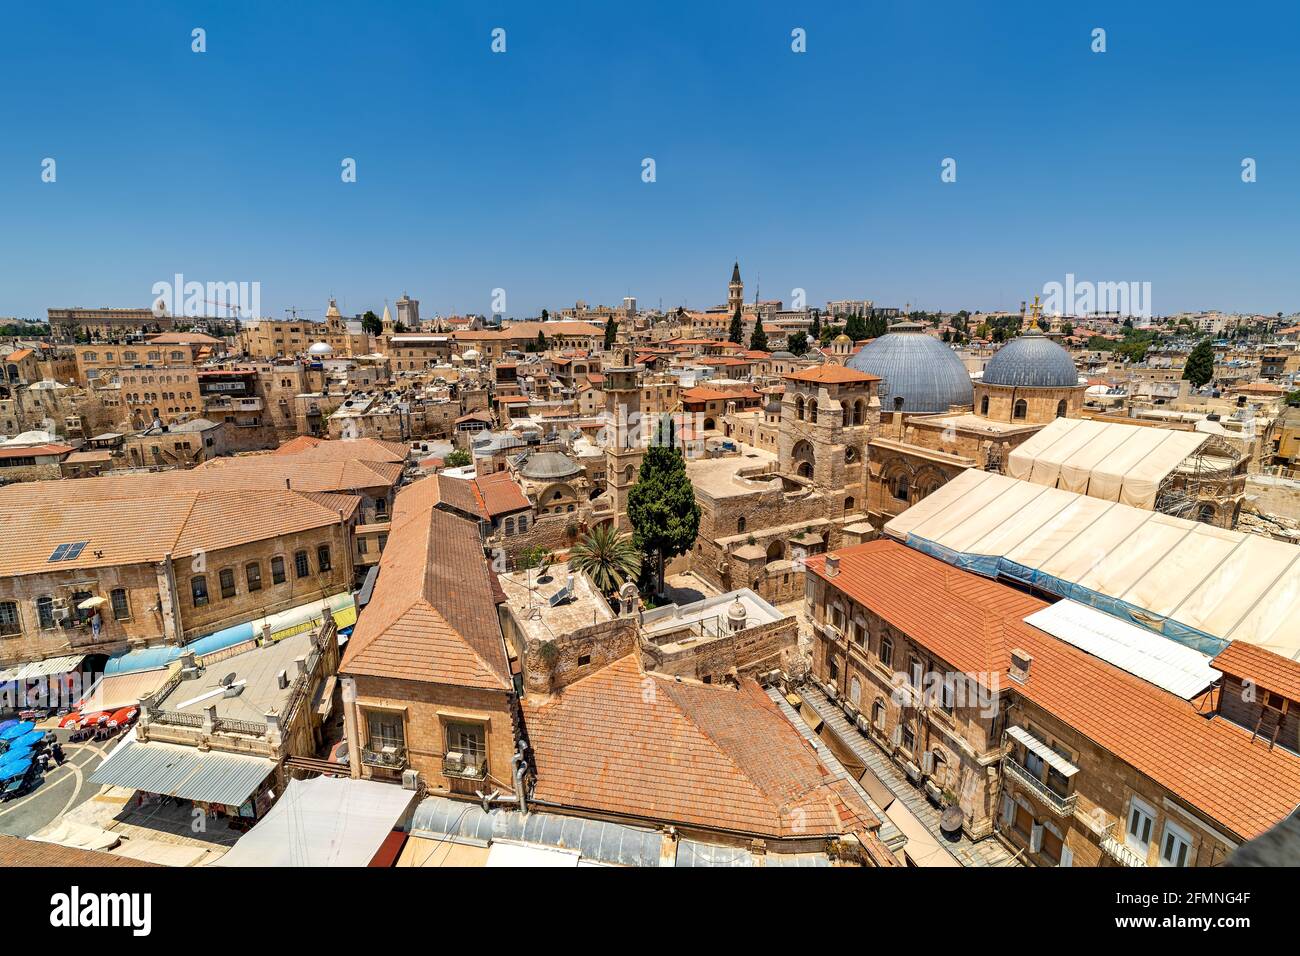 View from above of red roofs, houses, minarets and churches in old city of Jerusalem, Israel. Stock Photo